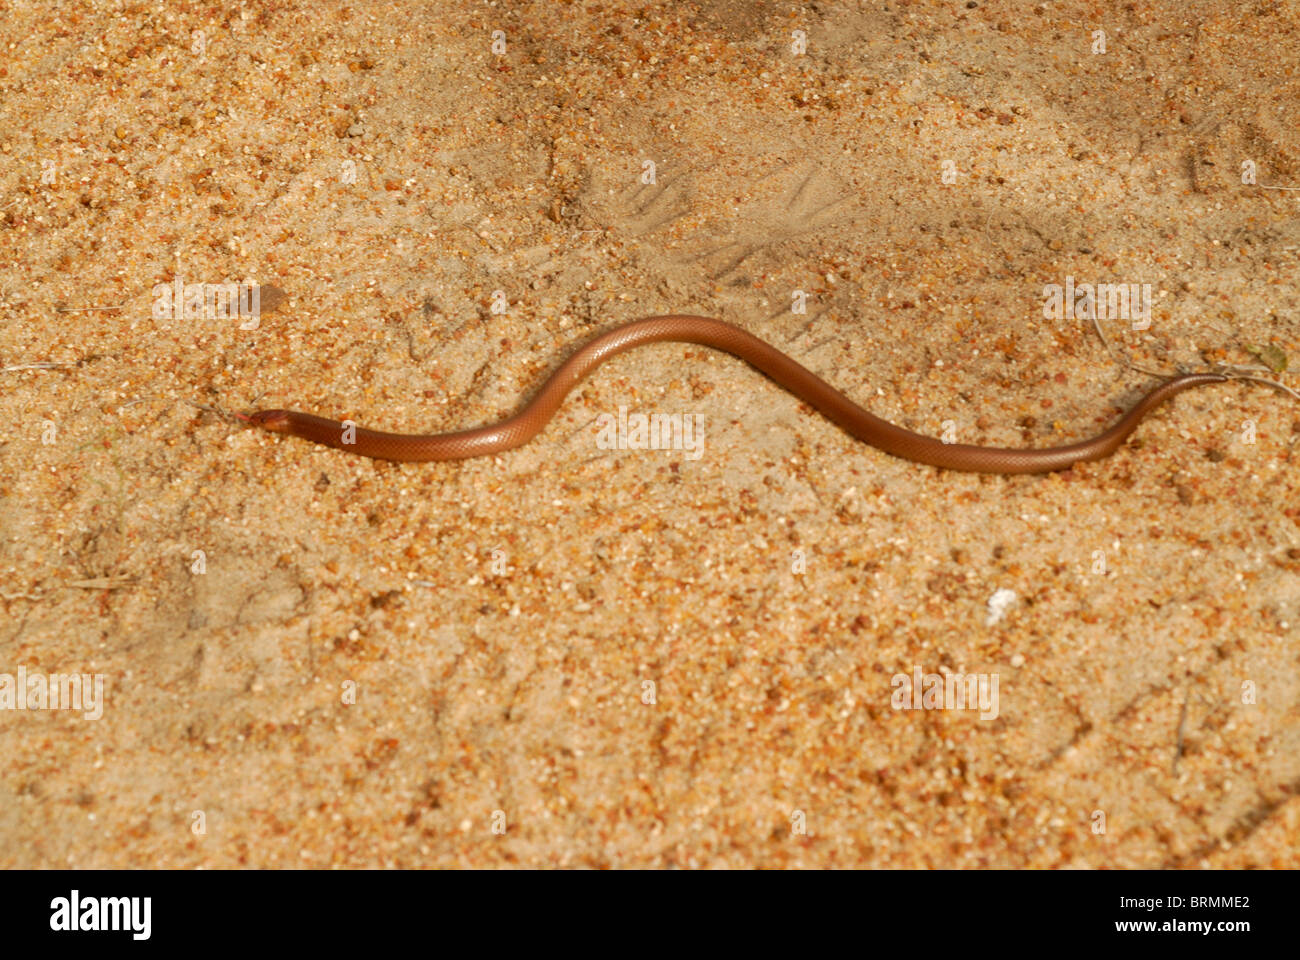 Purple glossed snake slithering along the sand Stock Photo